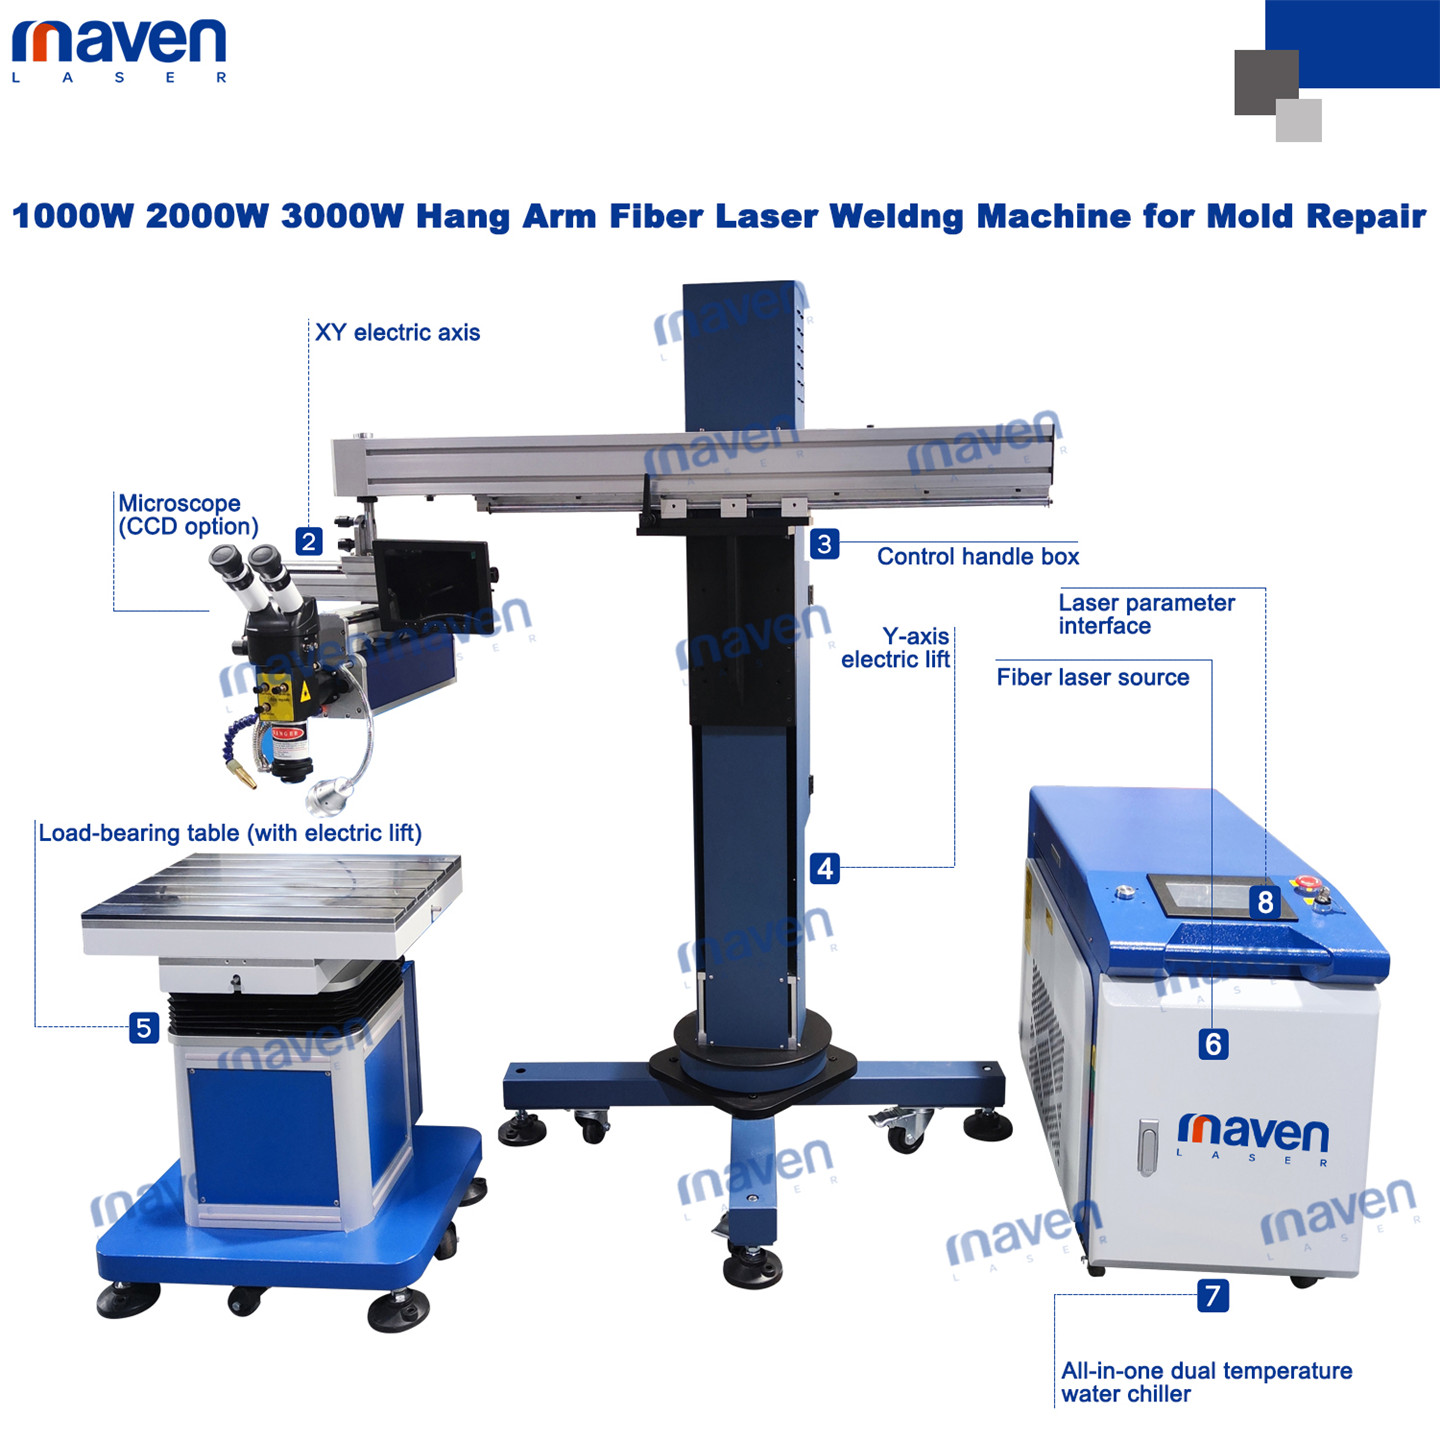 MavenLaser 1500W 2000W Cantilever Mold Laser Welder with Lifter Arm for Precision Mould (12)